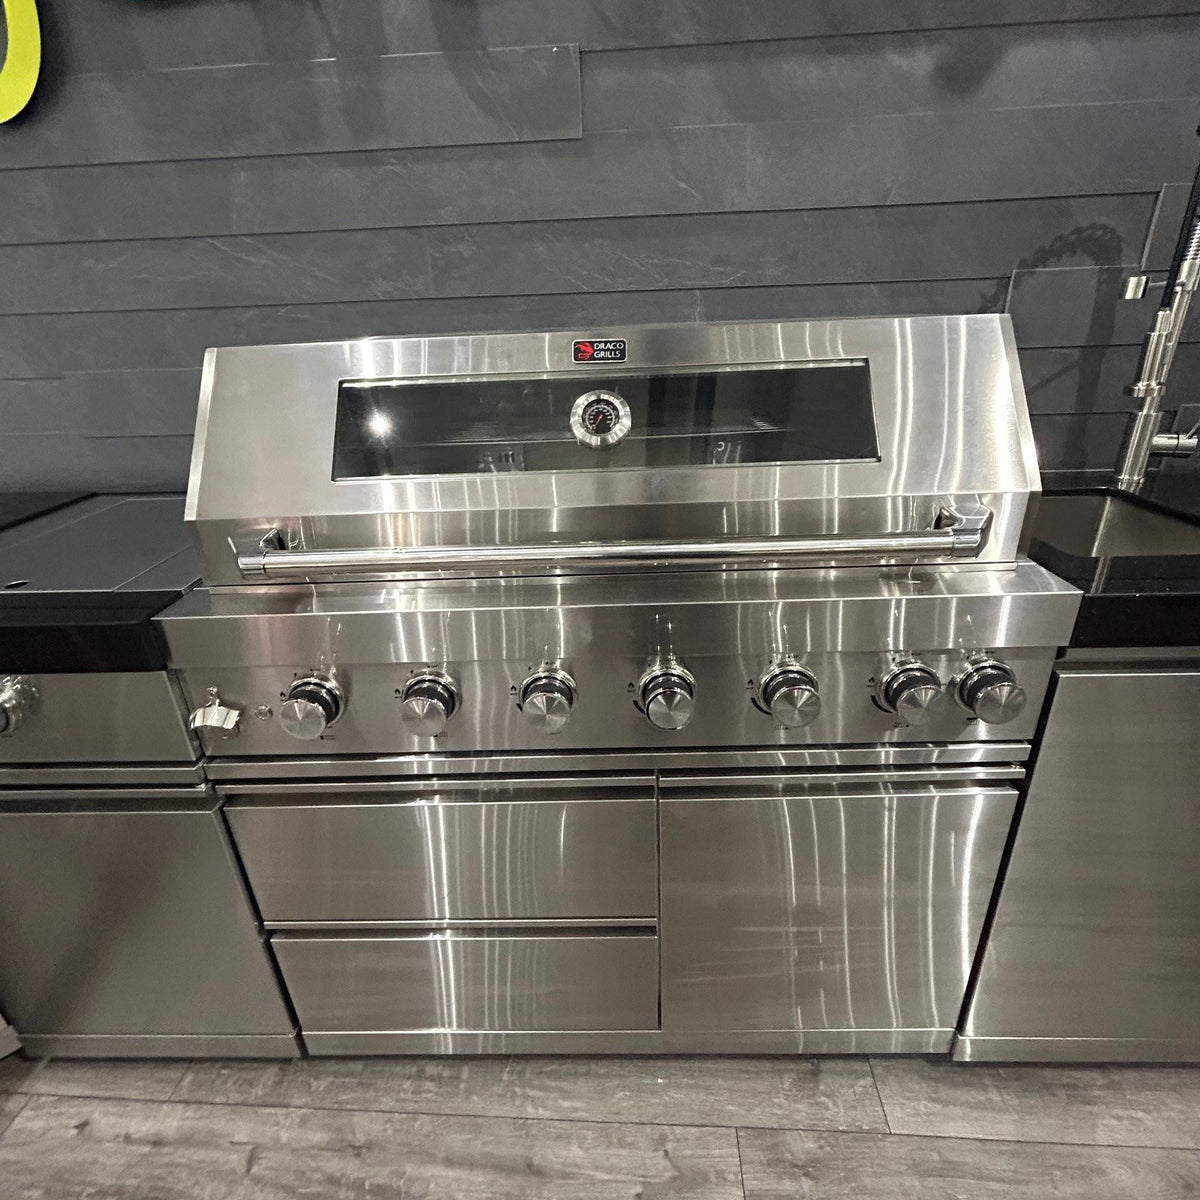 Ex Display Draco Grills 6 Burner Stainless Steel Outdoor Kitchen with Sear Station, 90 Degree Corner, Double Cupboard and Sink and Fridge Unit